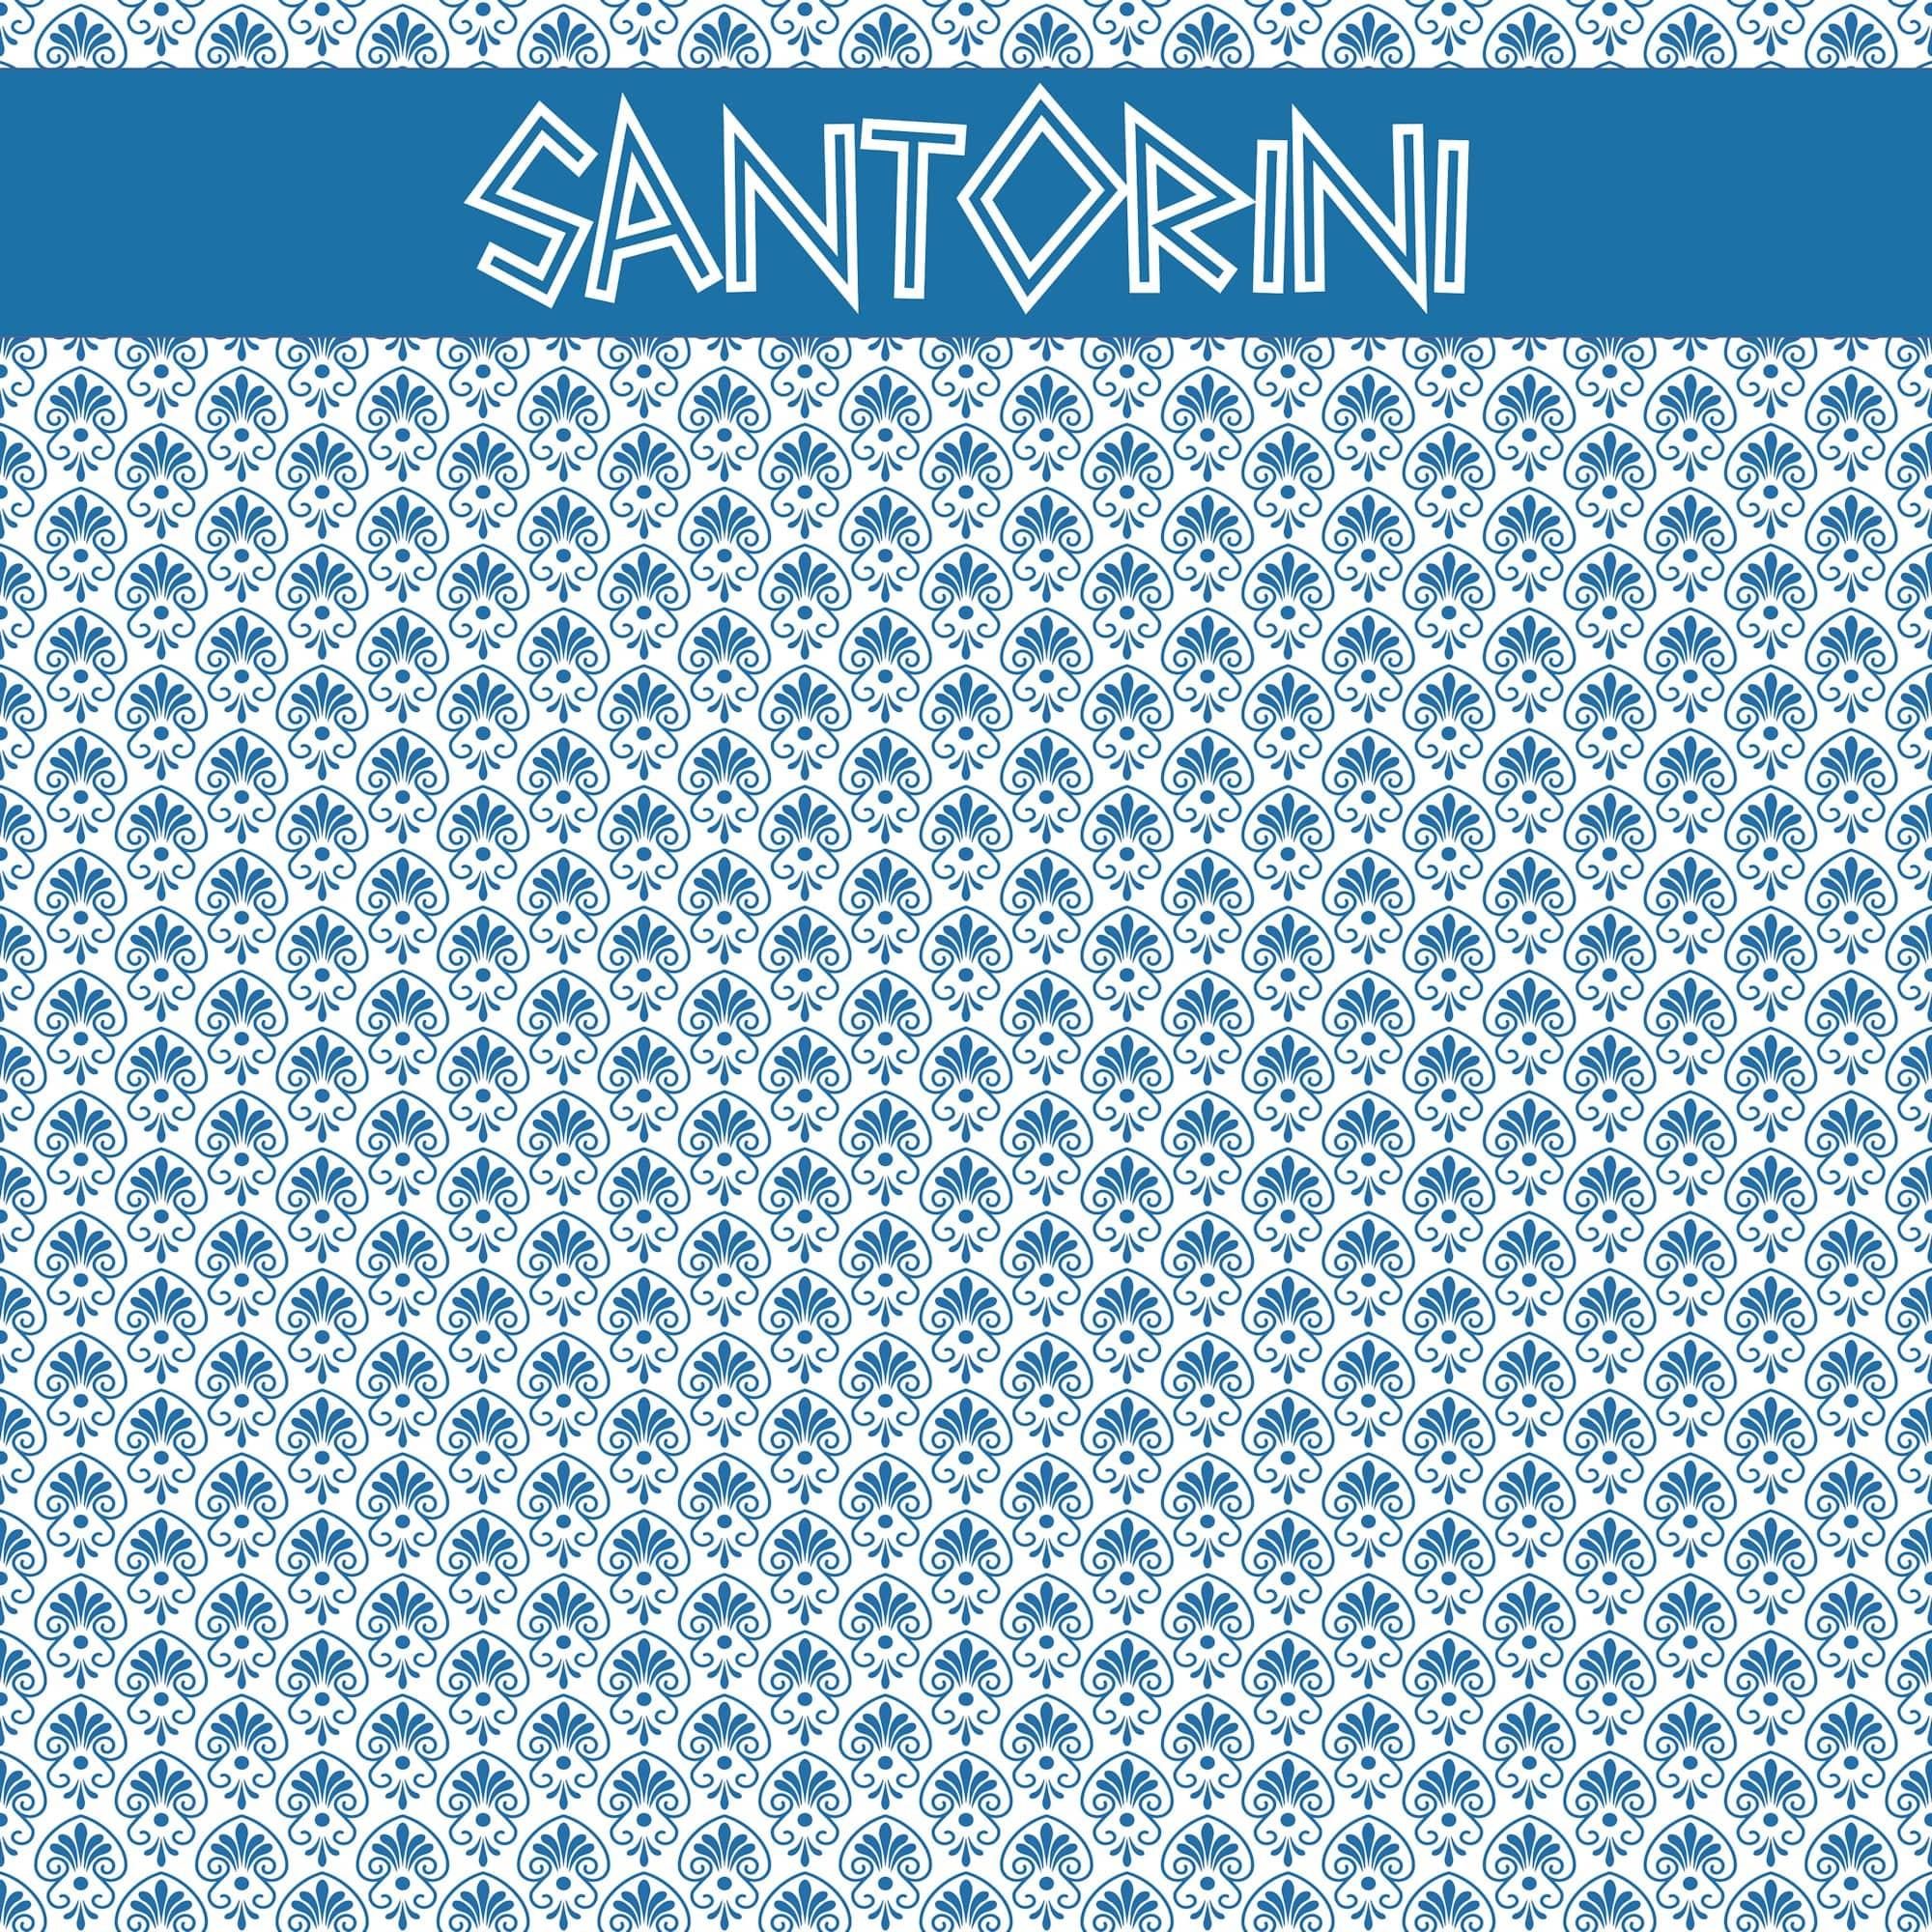 Greece Collection Santorini 12 x 12 Double-Sided Scrapbook Paper by SSC Designs - Scrapbook Supply Companies